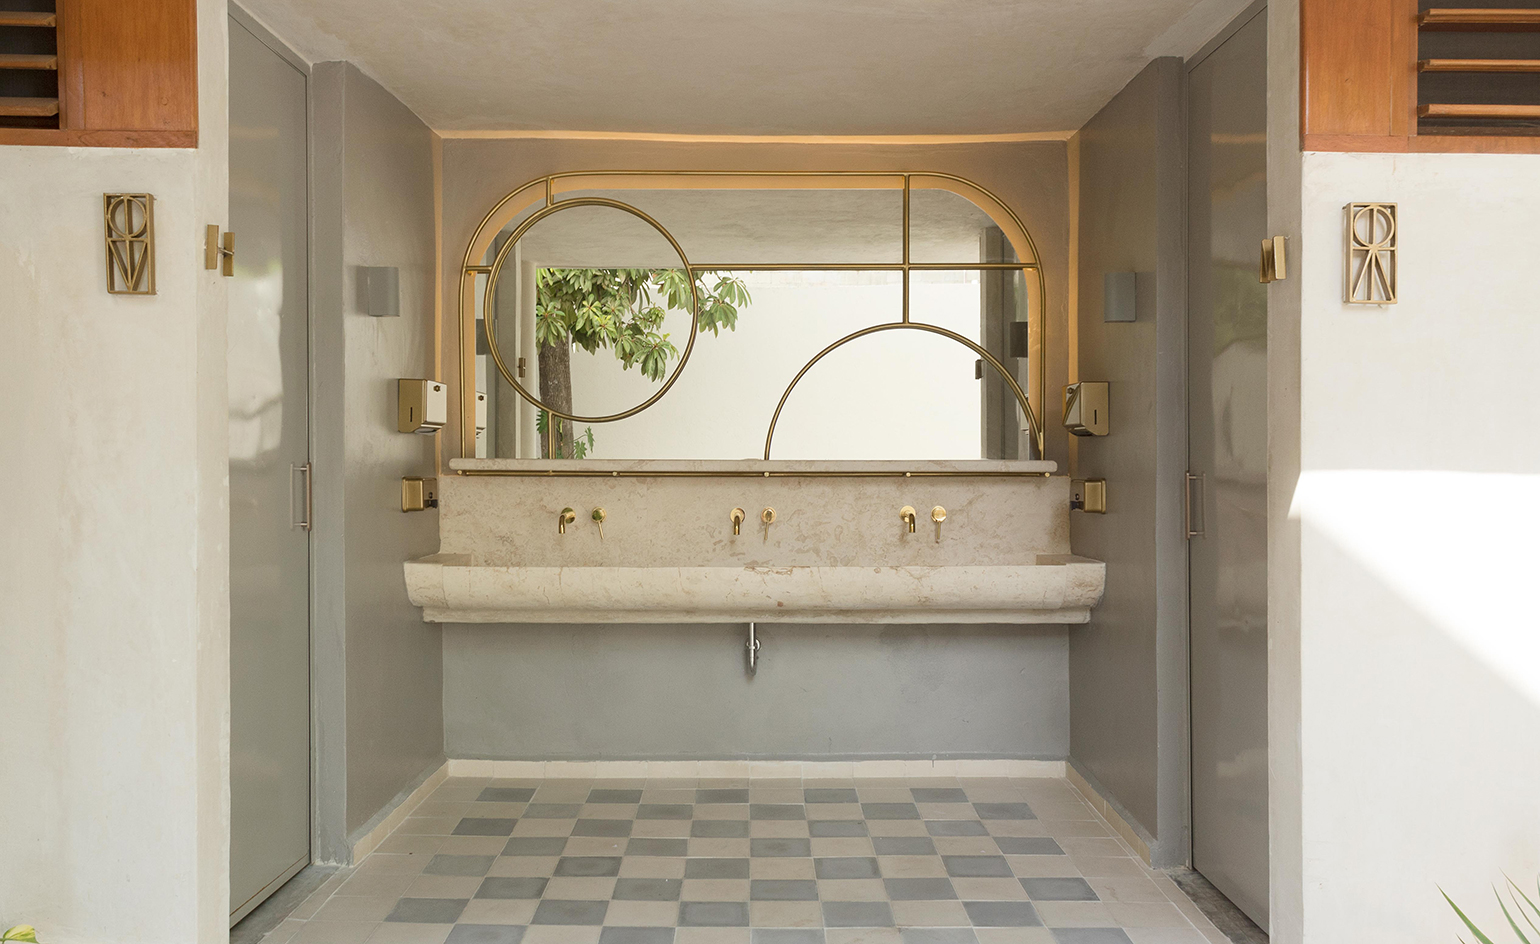 Lagalá bathroom with marble vanity, brass taps and mirror with brass circles and grey and white floor tiles